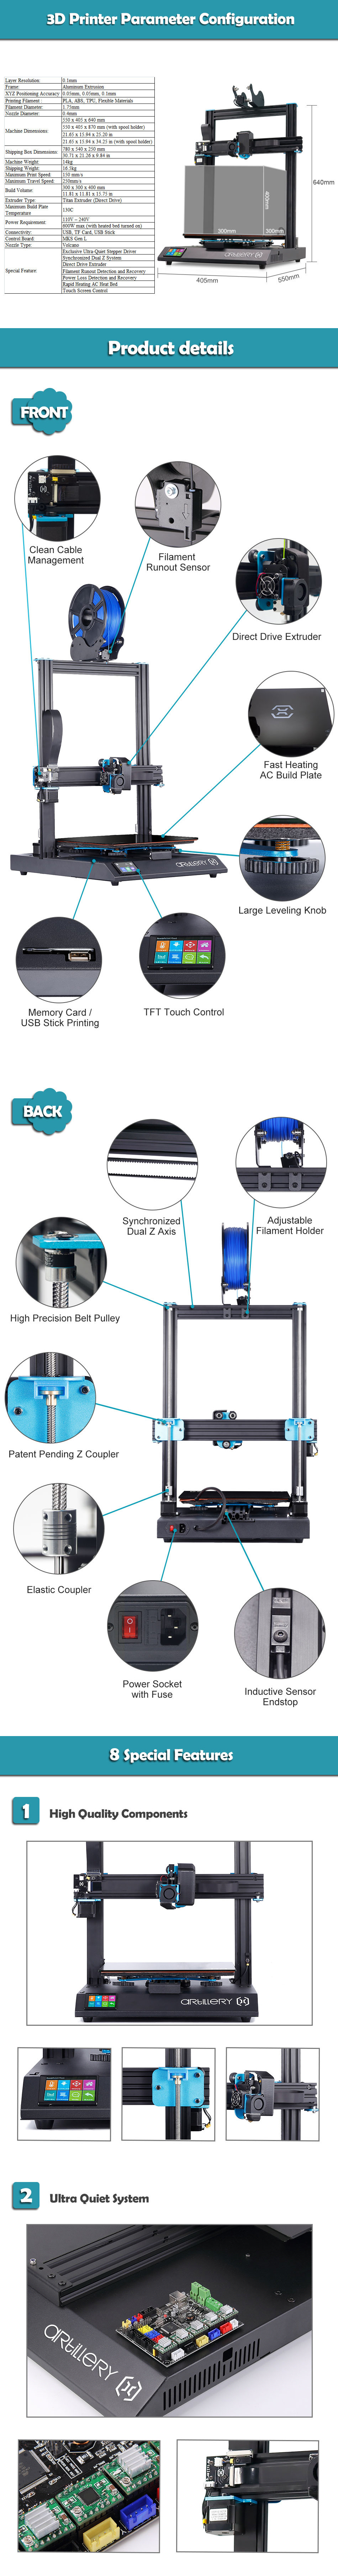 Artillery(Evnovo)® Sidewinder X1 3D Printer Kit with 300*300*400mm Large Print Size Support Resume Printing&Filament Runout Detection With Dual Z 10